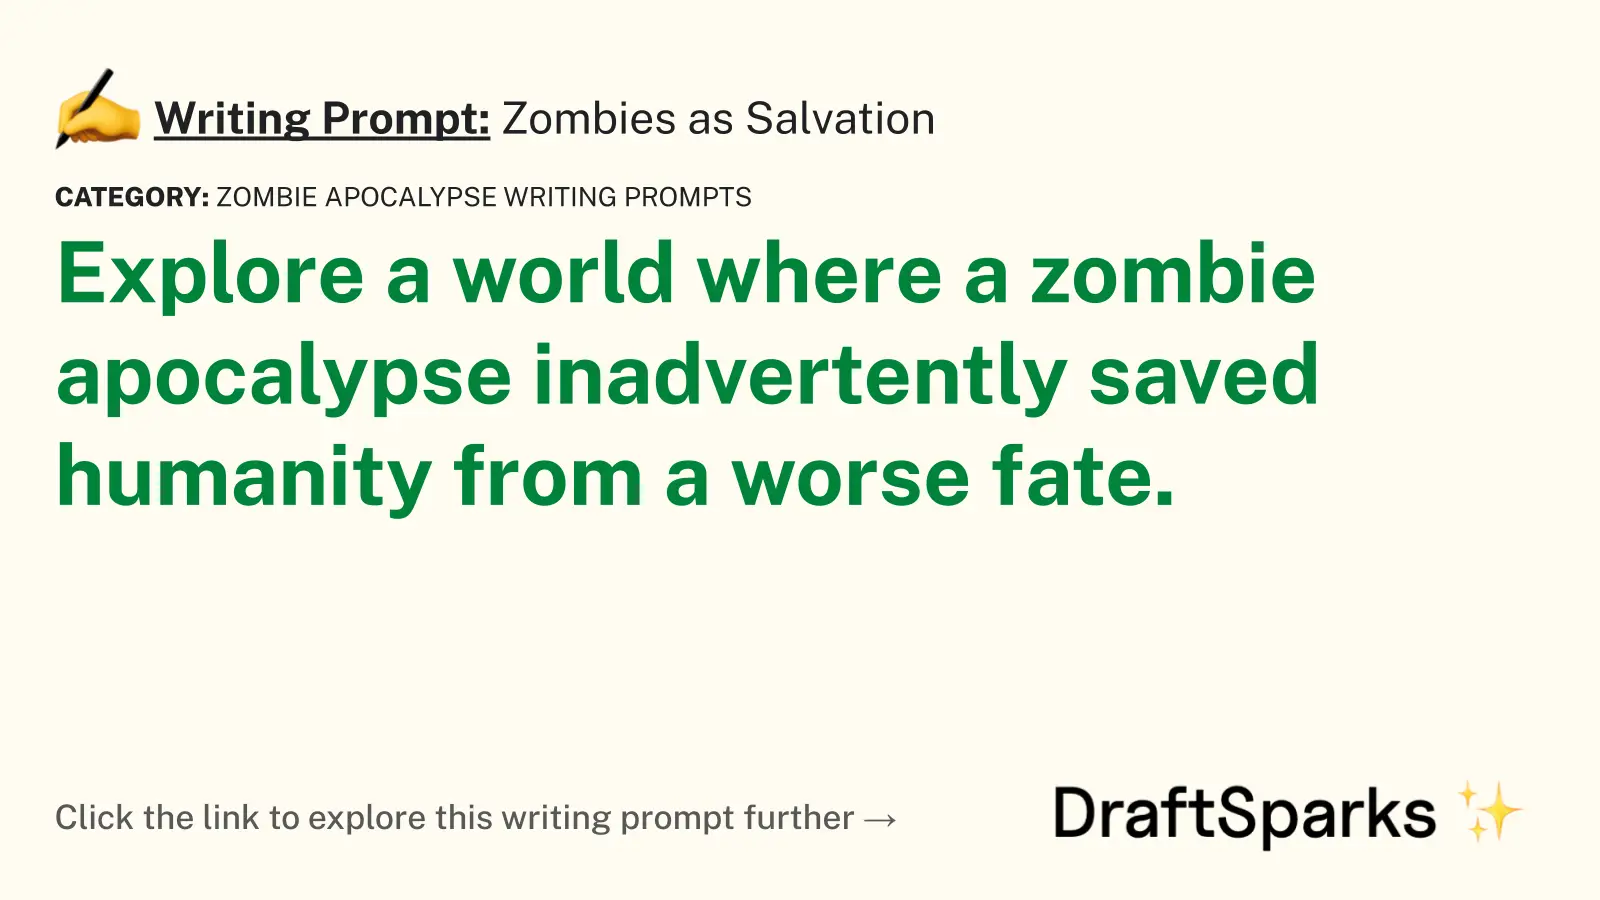 Zombies as Salvation